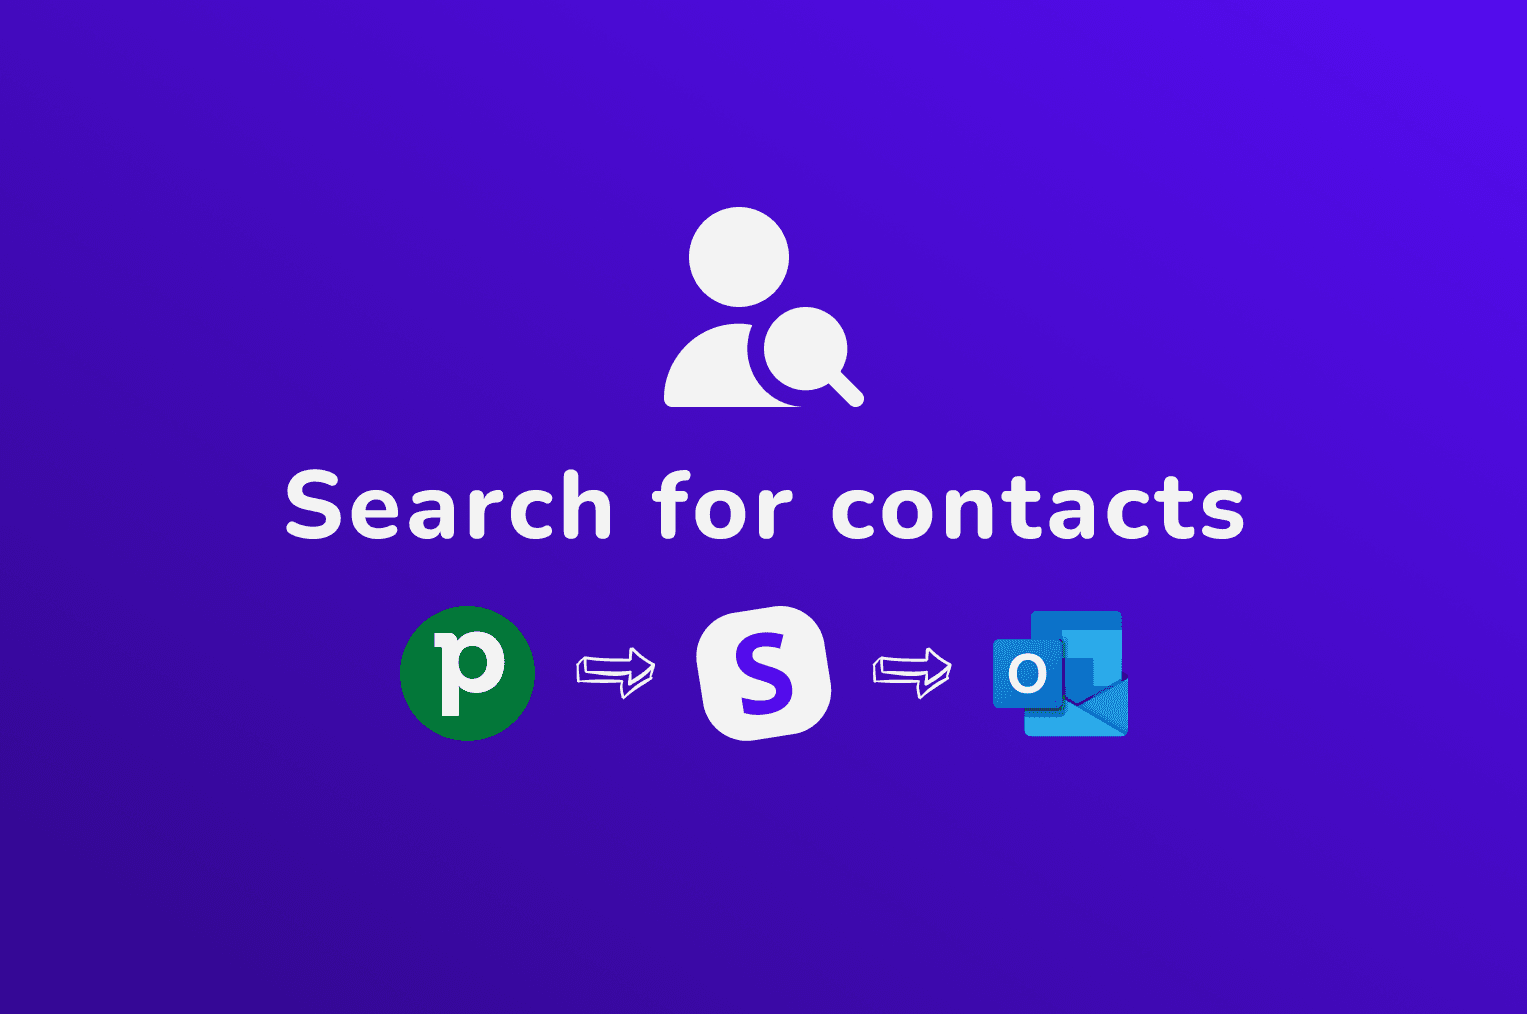 Search for contacts